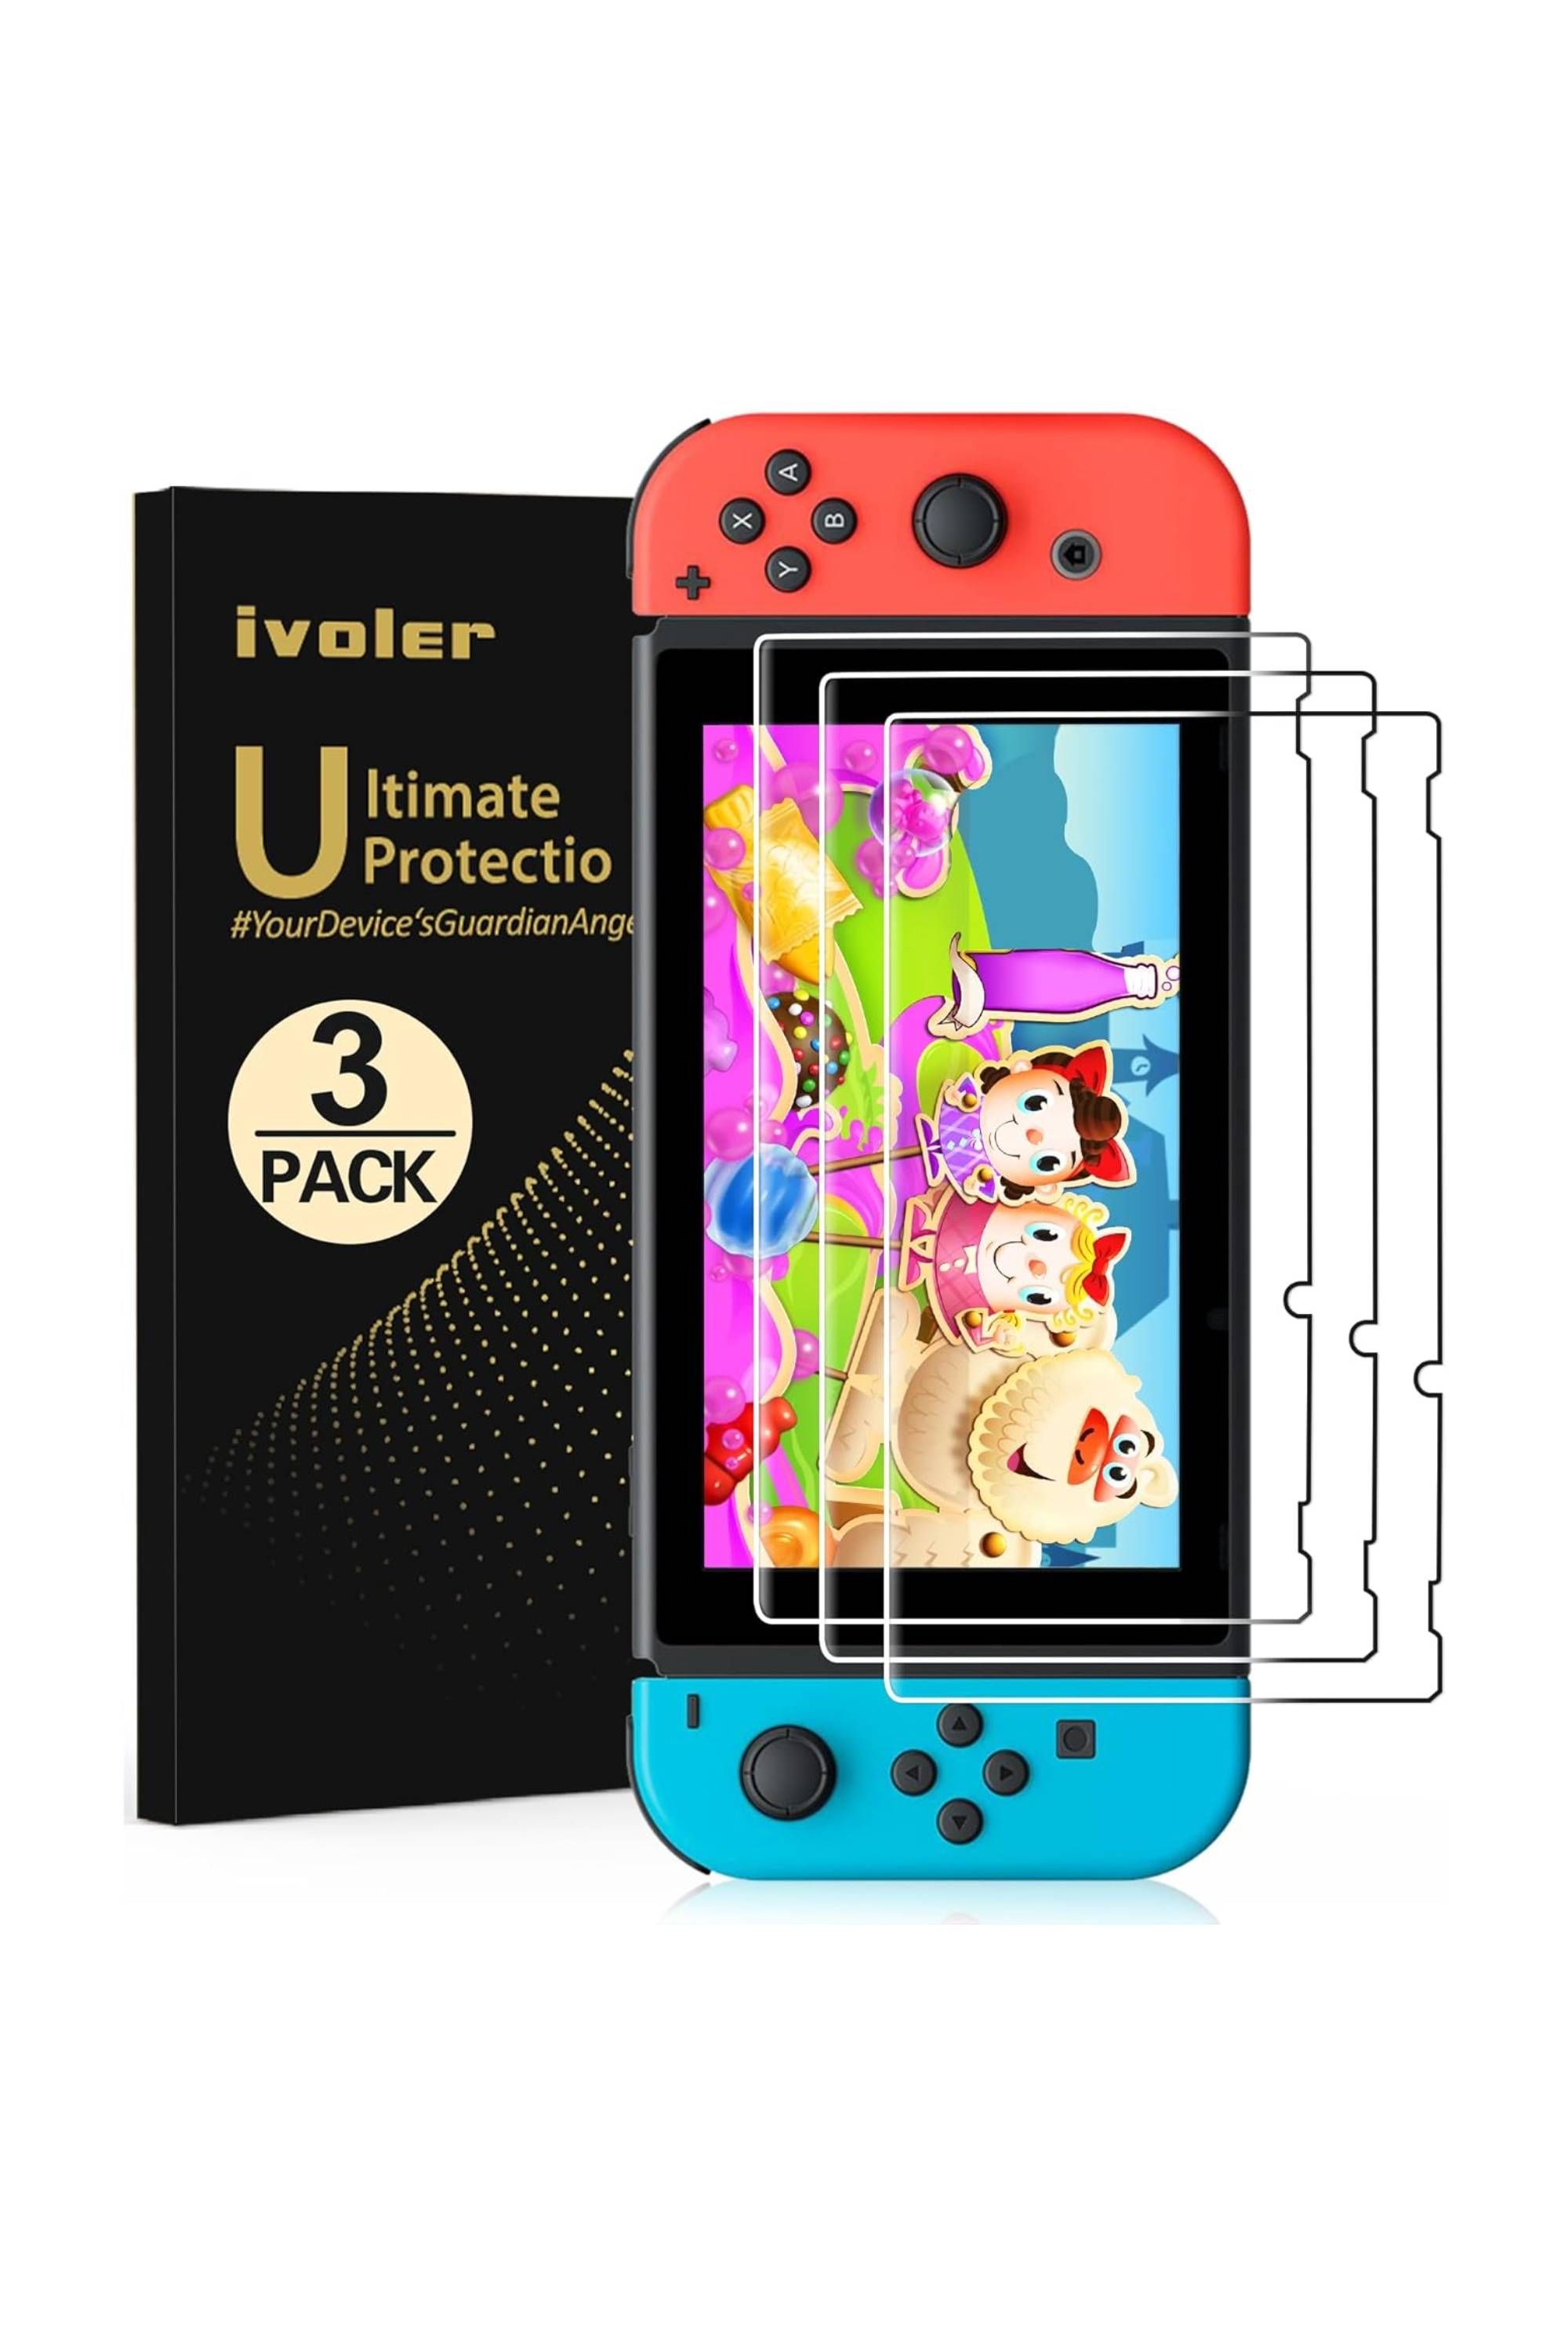 ivoler 3-Pack Tempered Glass Screen Protector for Nintendo Switch